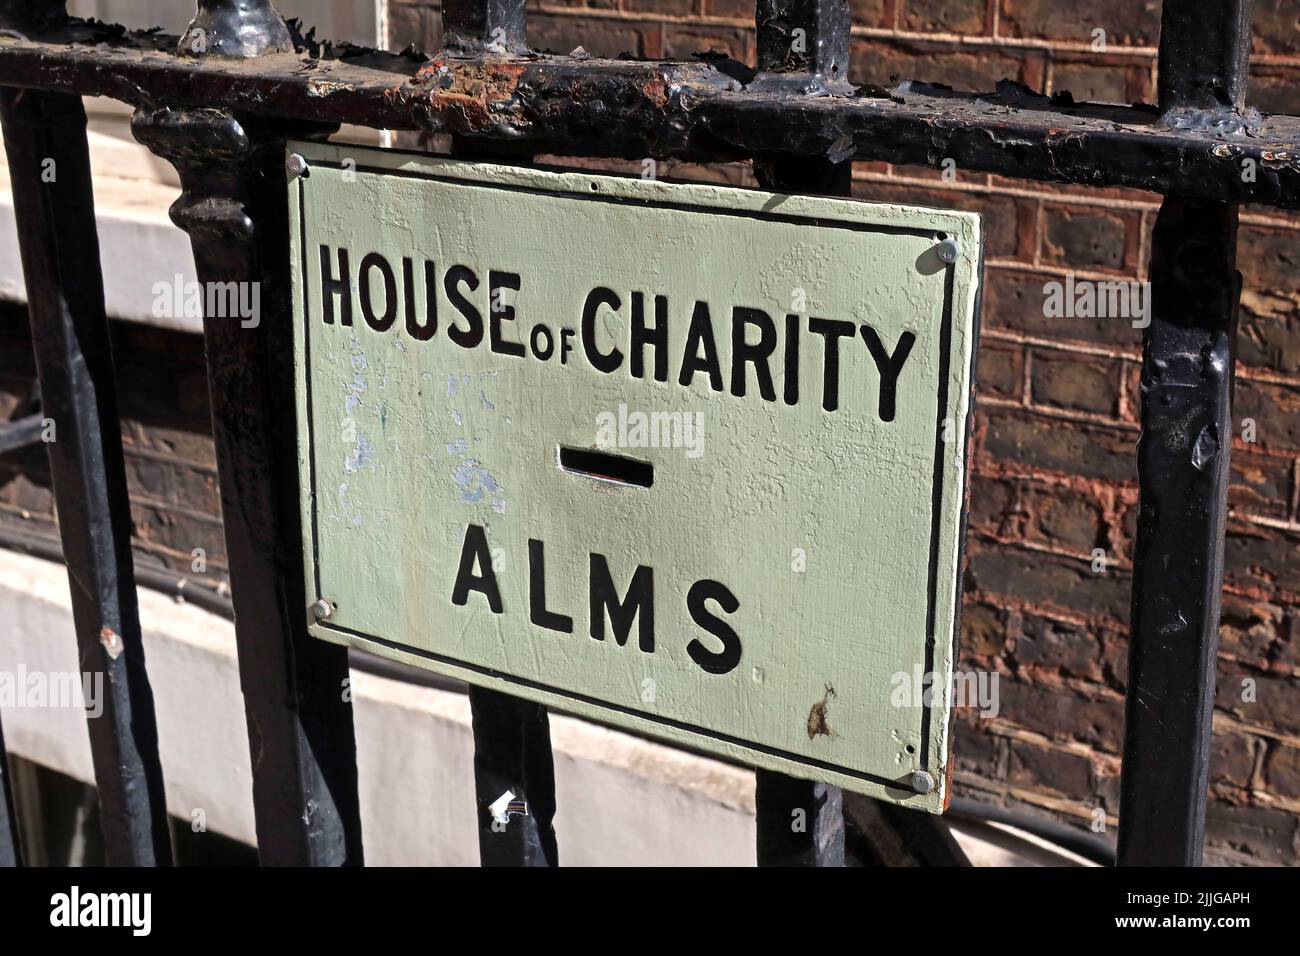 The Penny Chute, Collection pipe, Alms for the House of Charity - The House of St Barnabas at 1, Greek Street, Soho, London, UK, W1D 4NQ Stockfoto